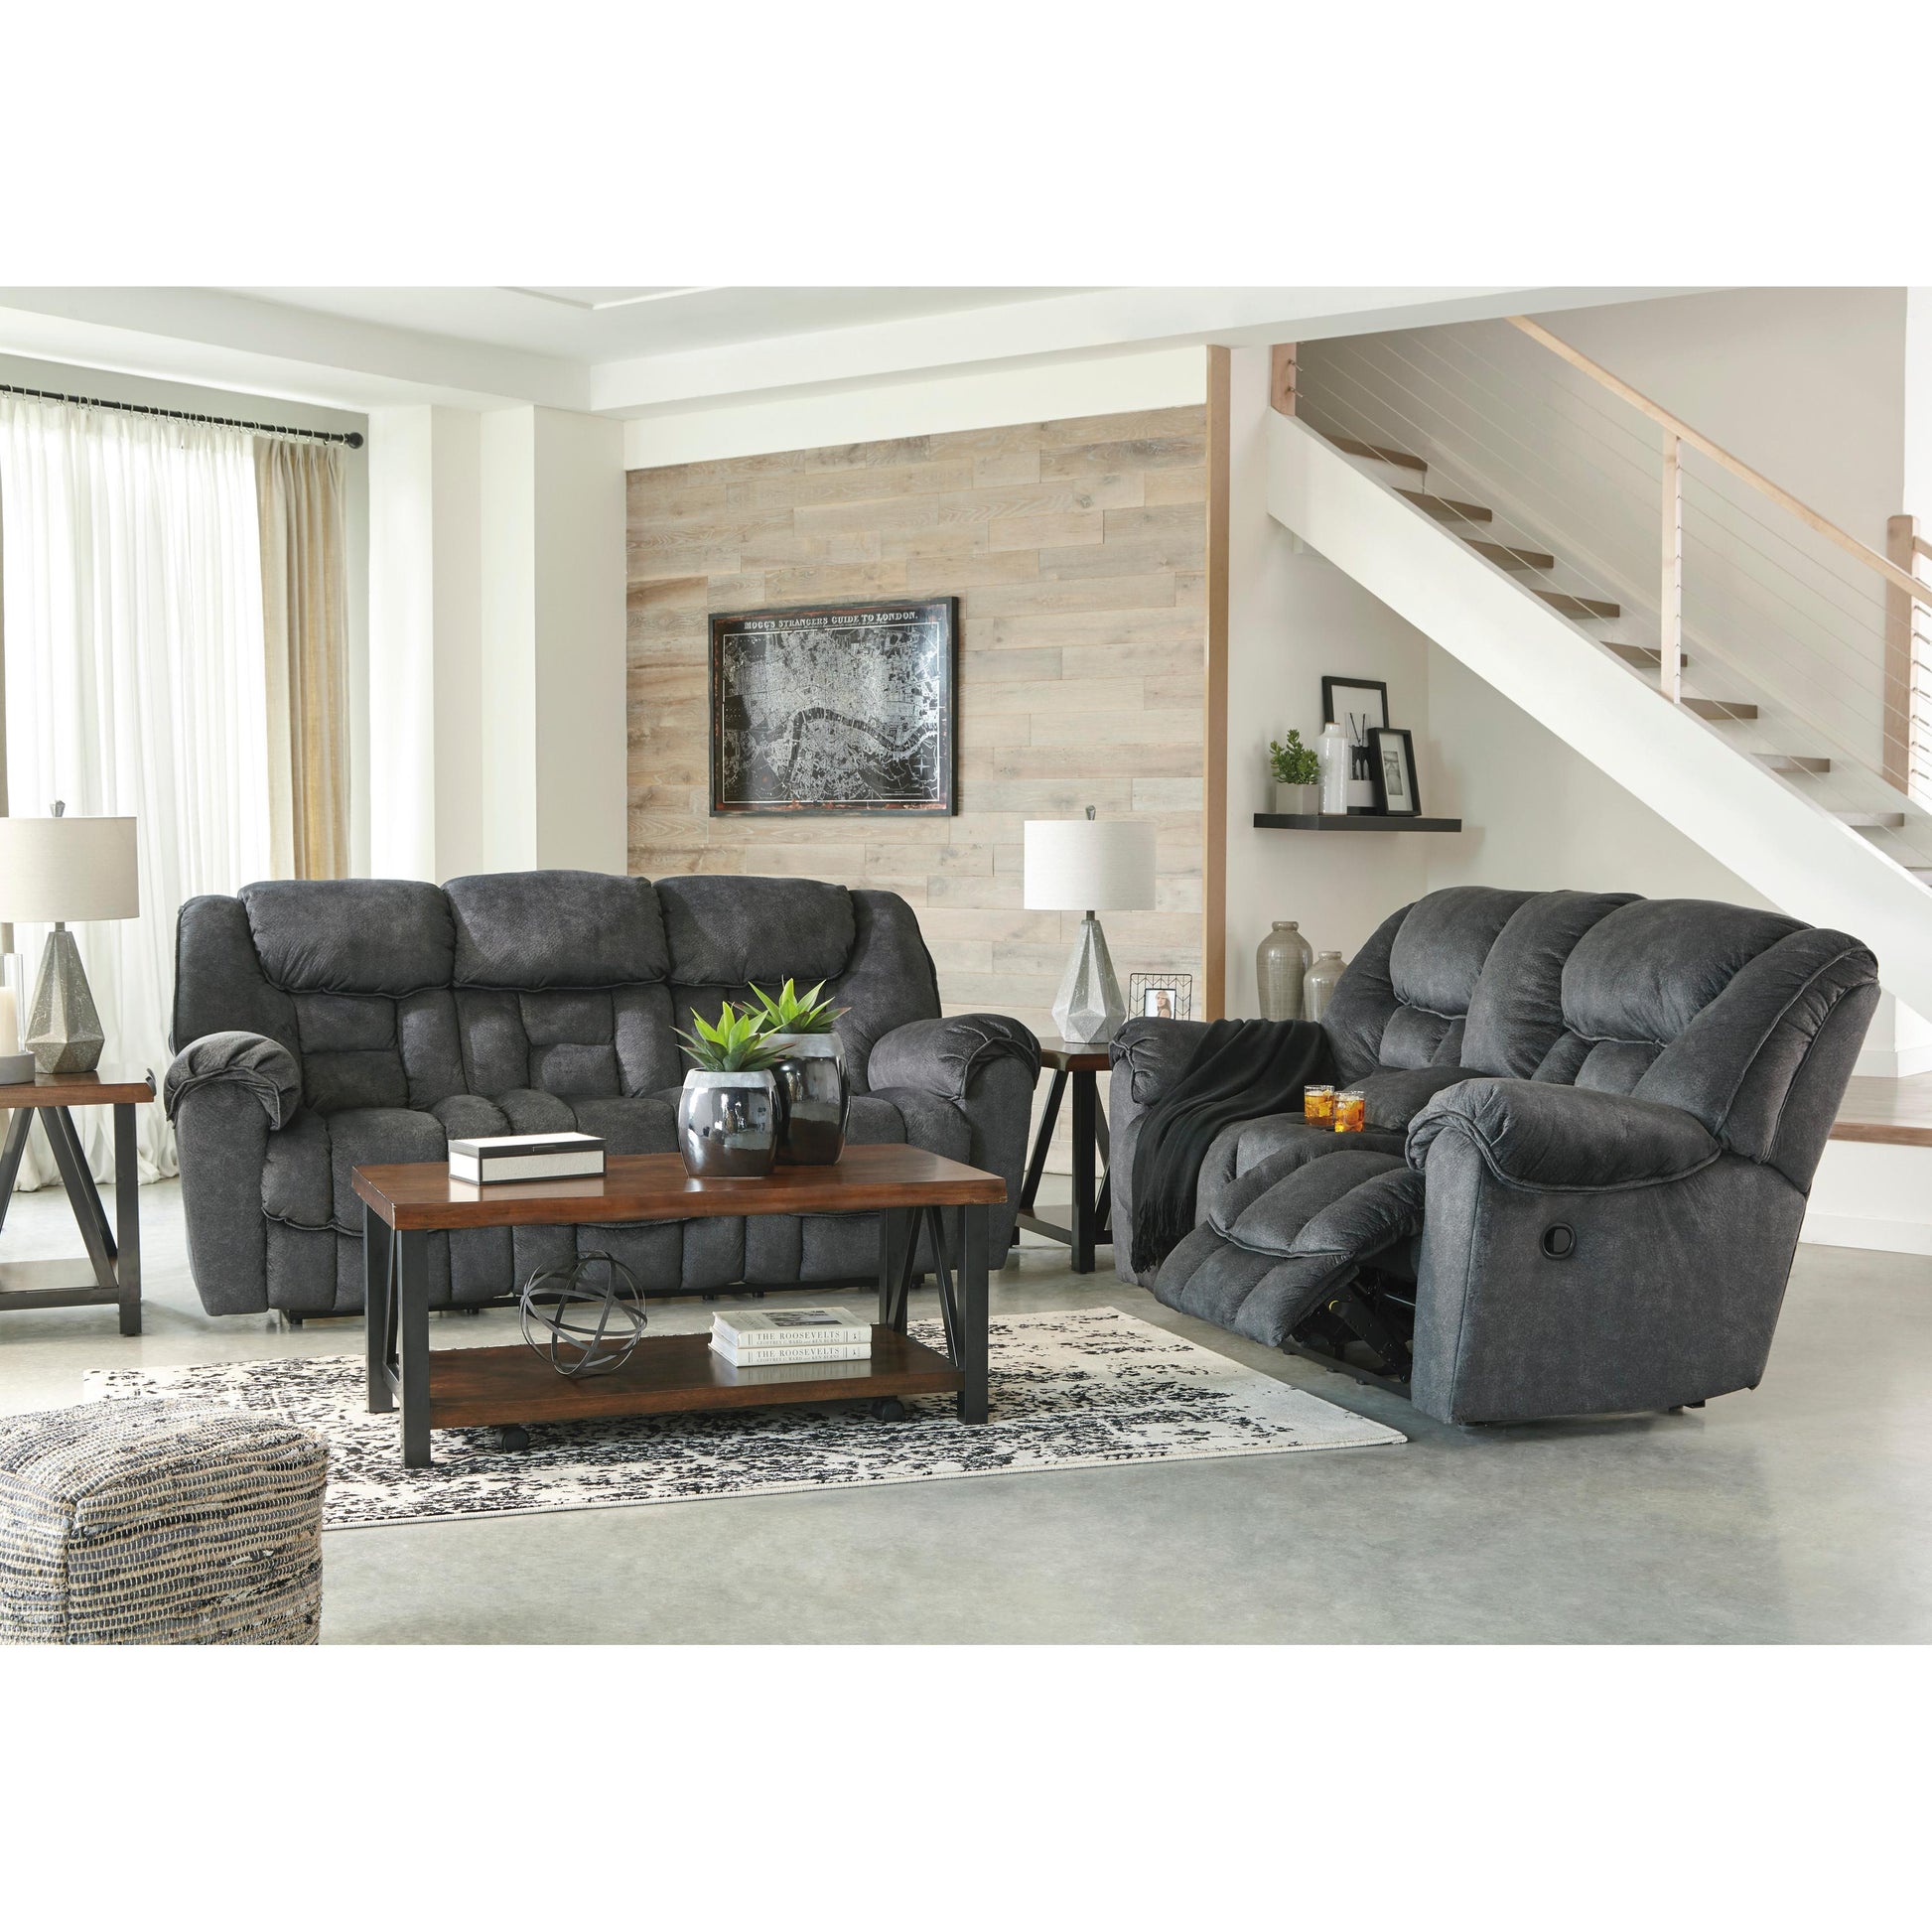 Signature Design by Ashley Capehorn Reclining Fabric Loveseat 7690294